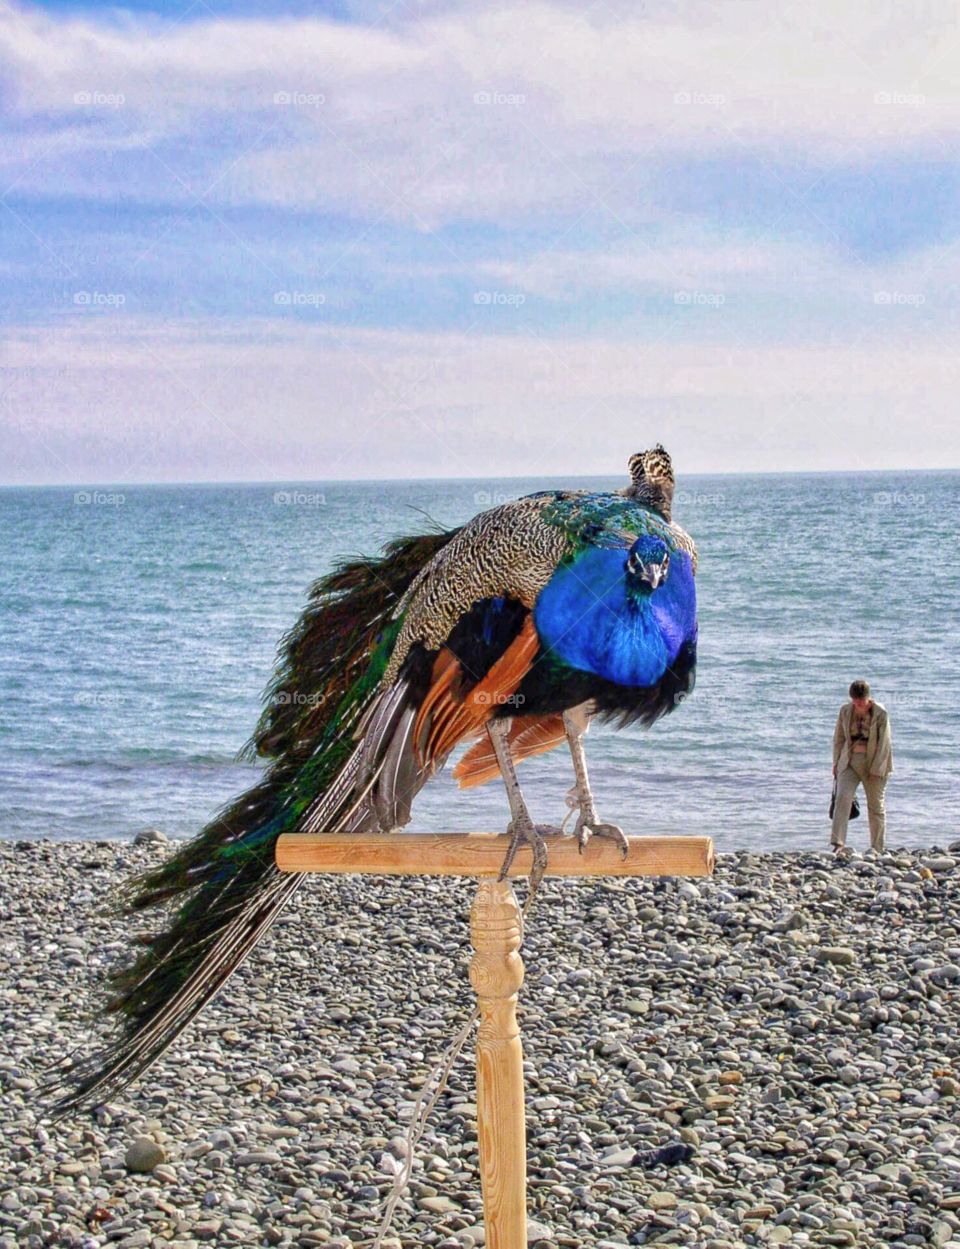 Peddler with peacock at Sochi beach